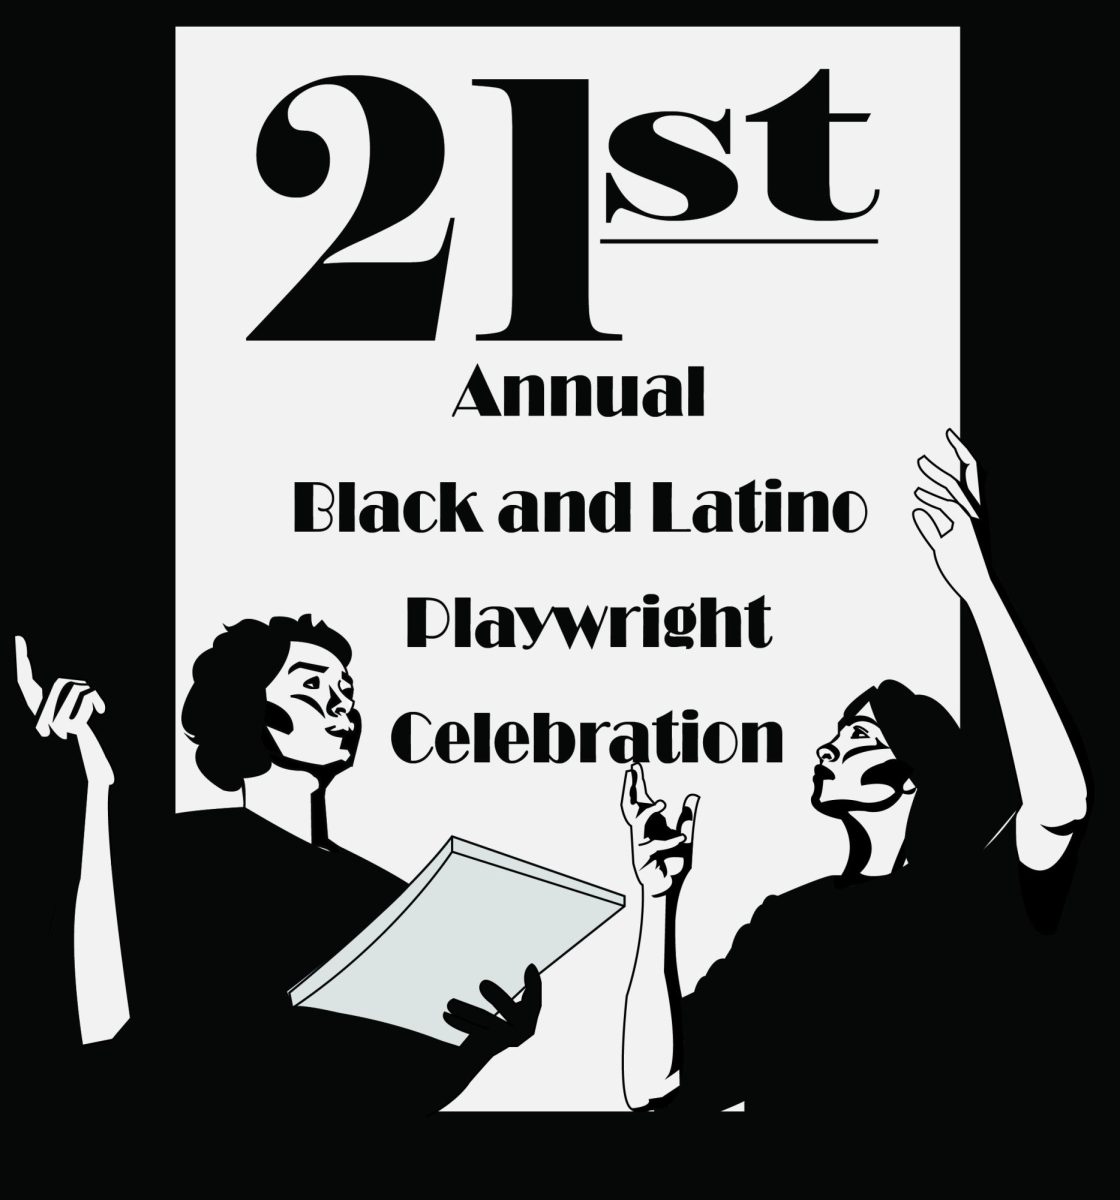 TXST Theatre to host 21st annual Black and Latino Playwright Celebration